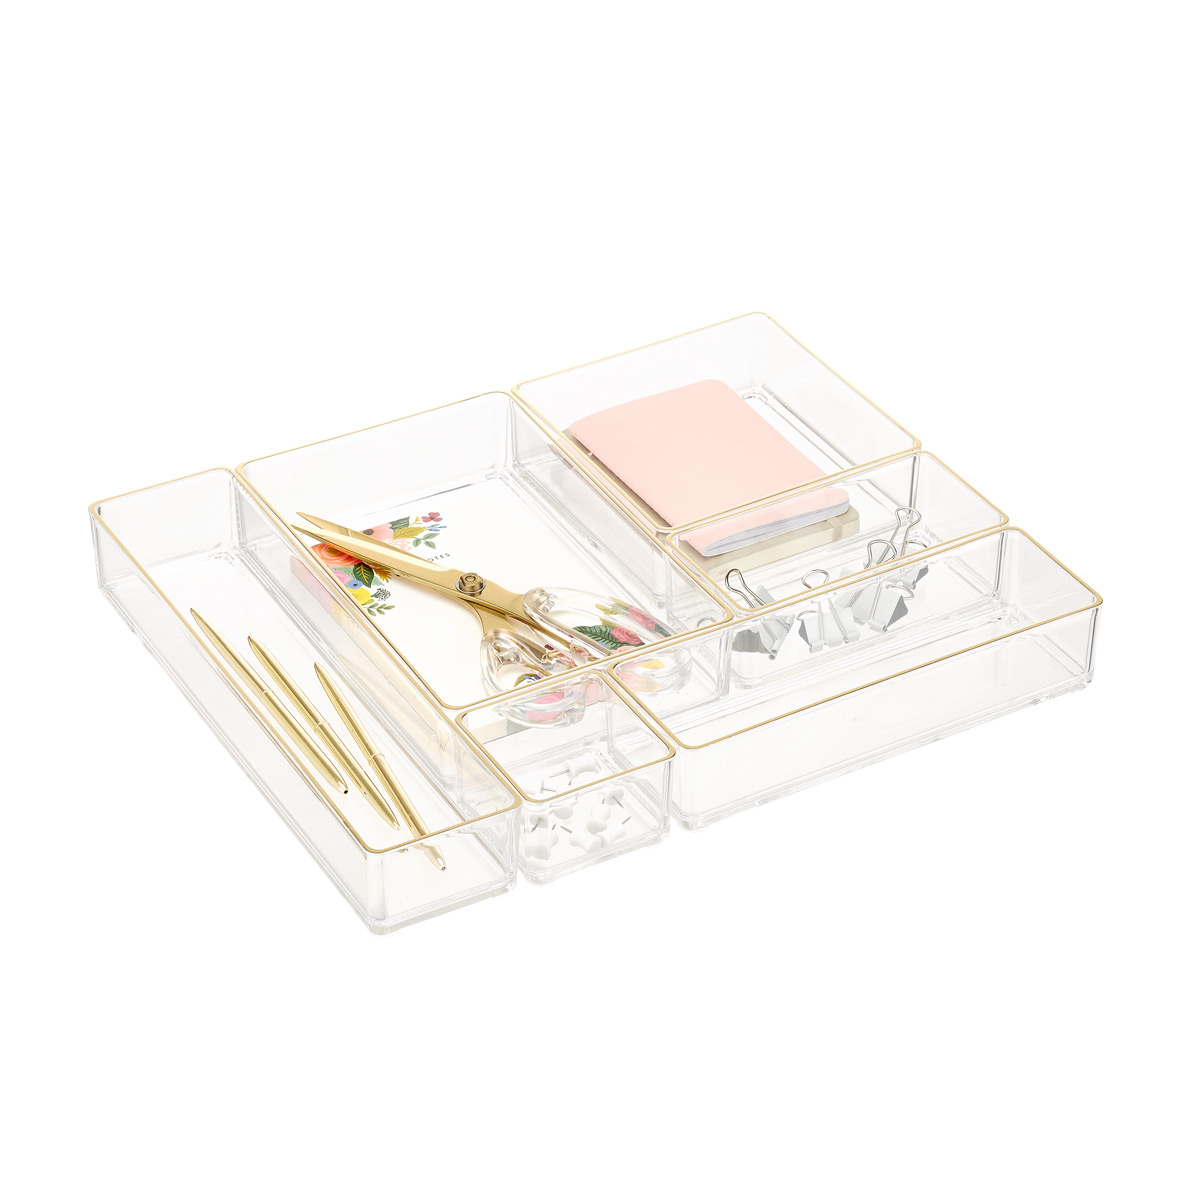 https://www.containerstore.com/catalogimages/369889/10078004-gold-trim-acrylic-drawer-or.jpg